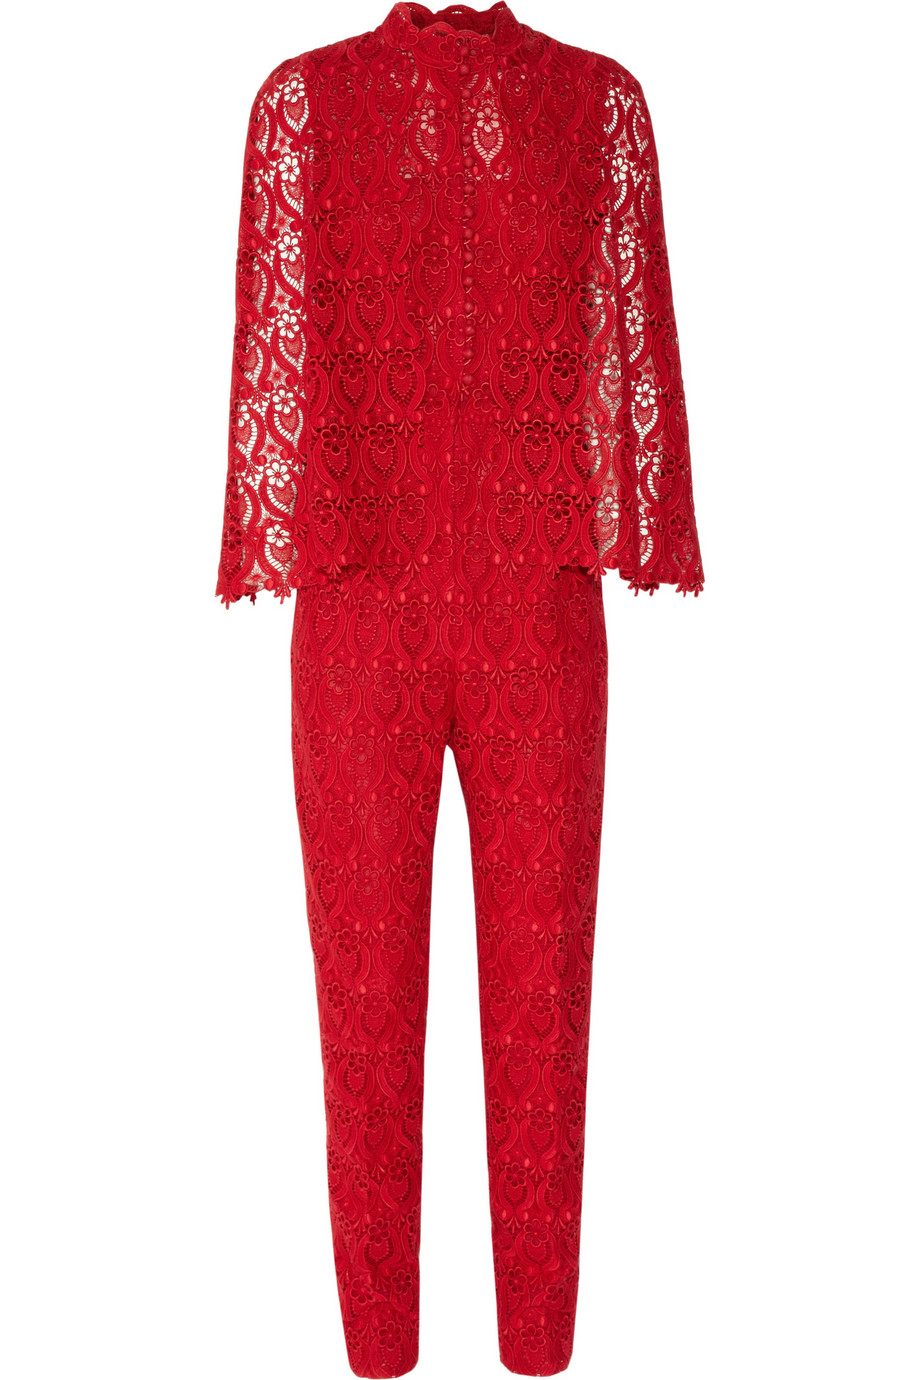 Valentino Macramélace Jumpsuit in Red | Lyst